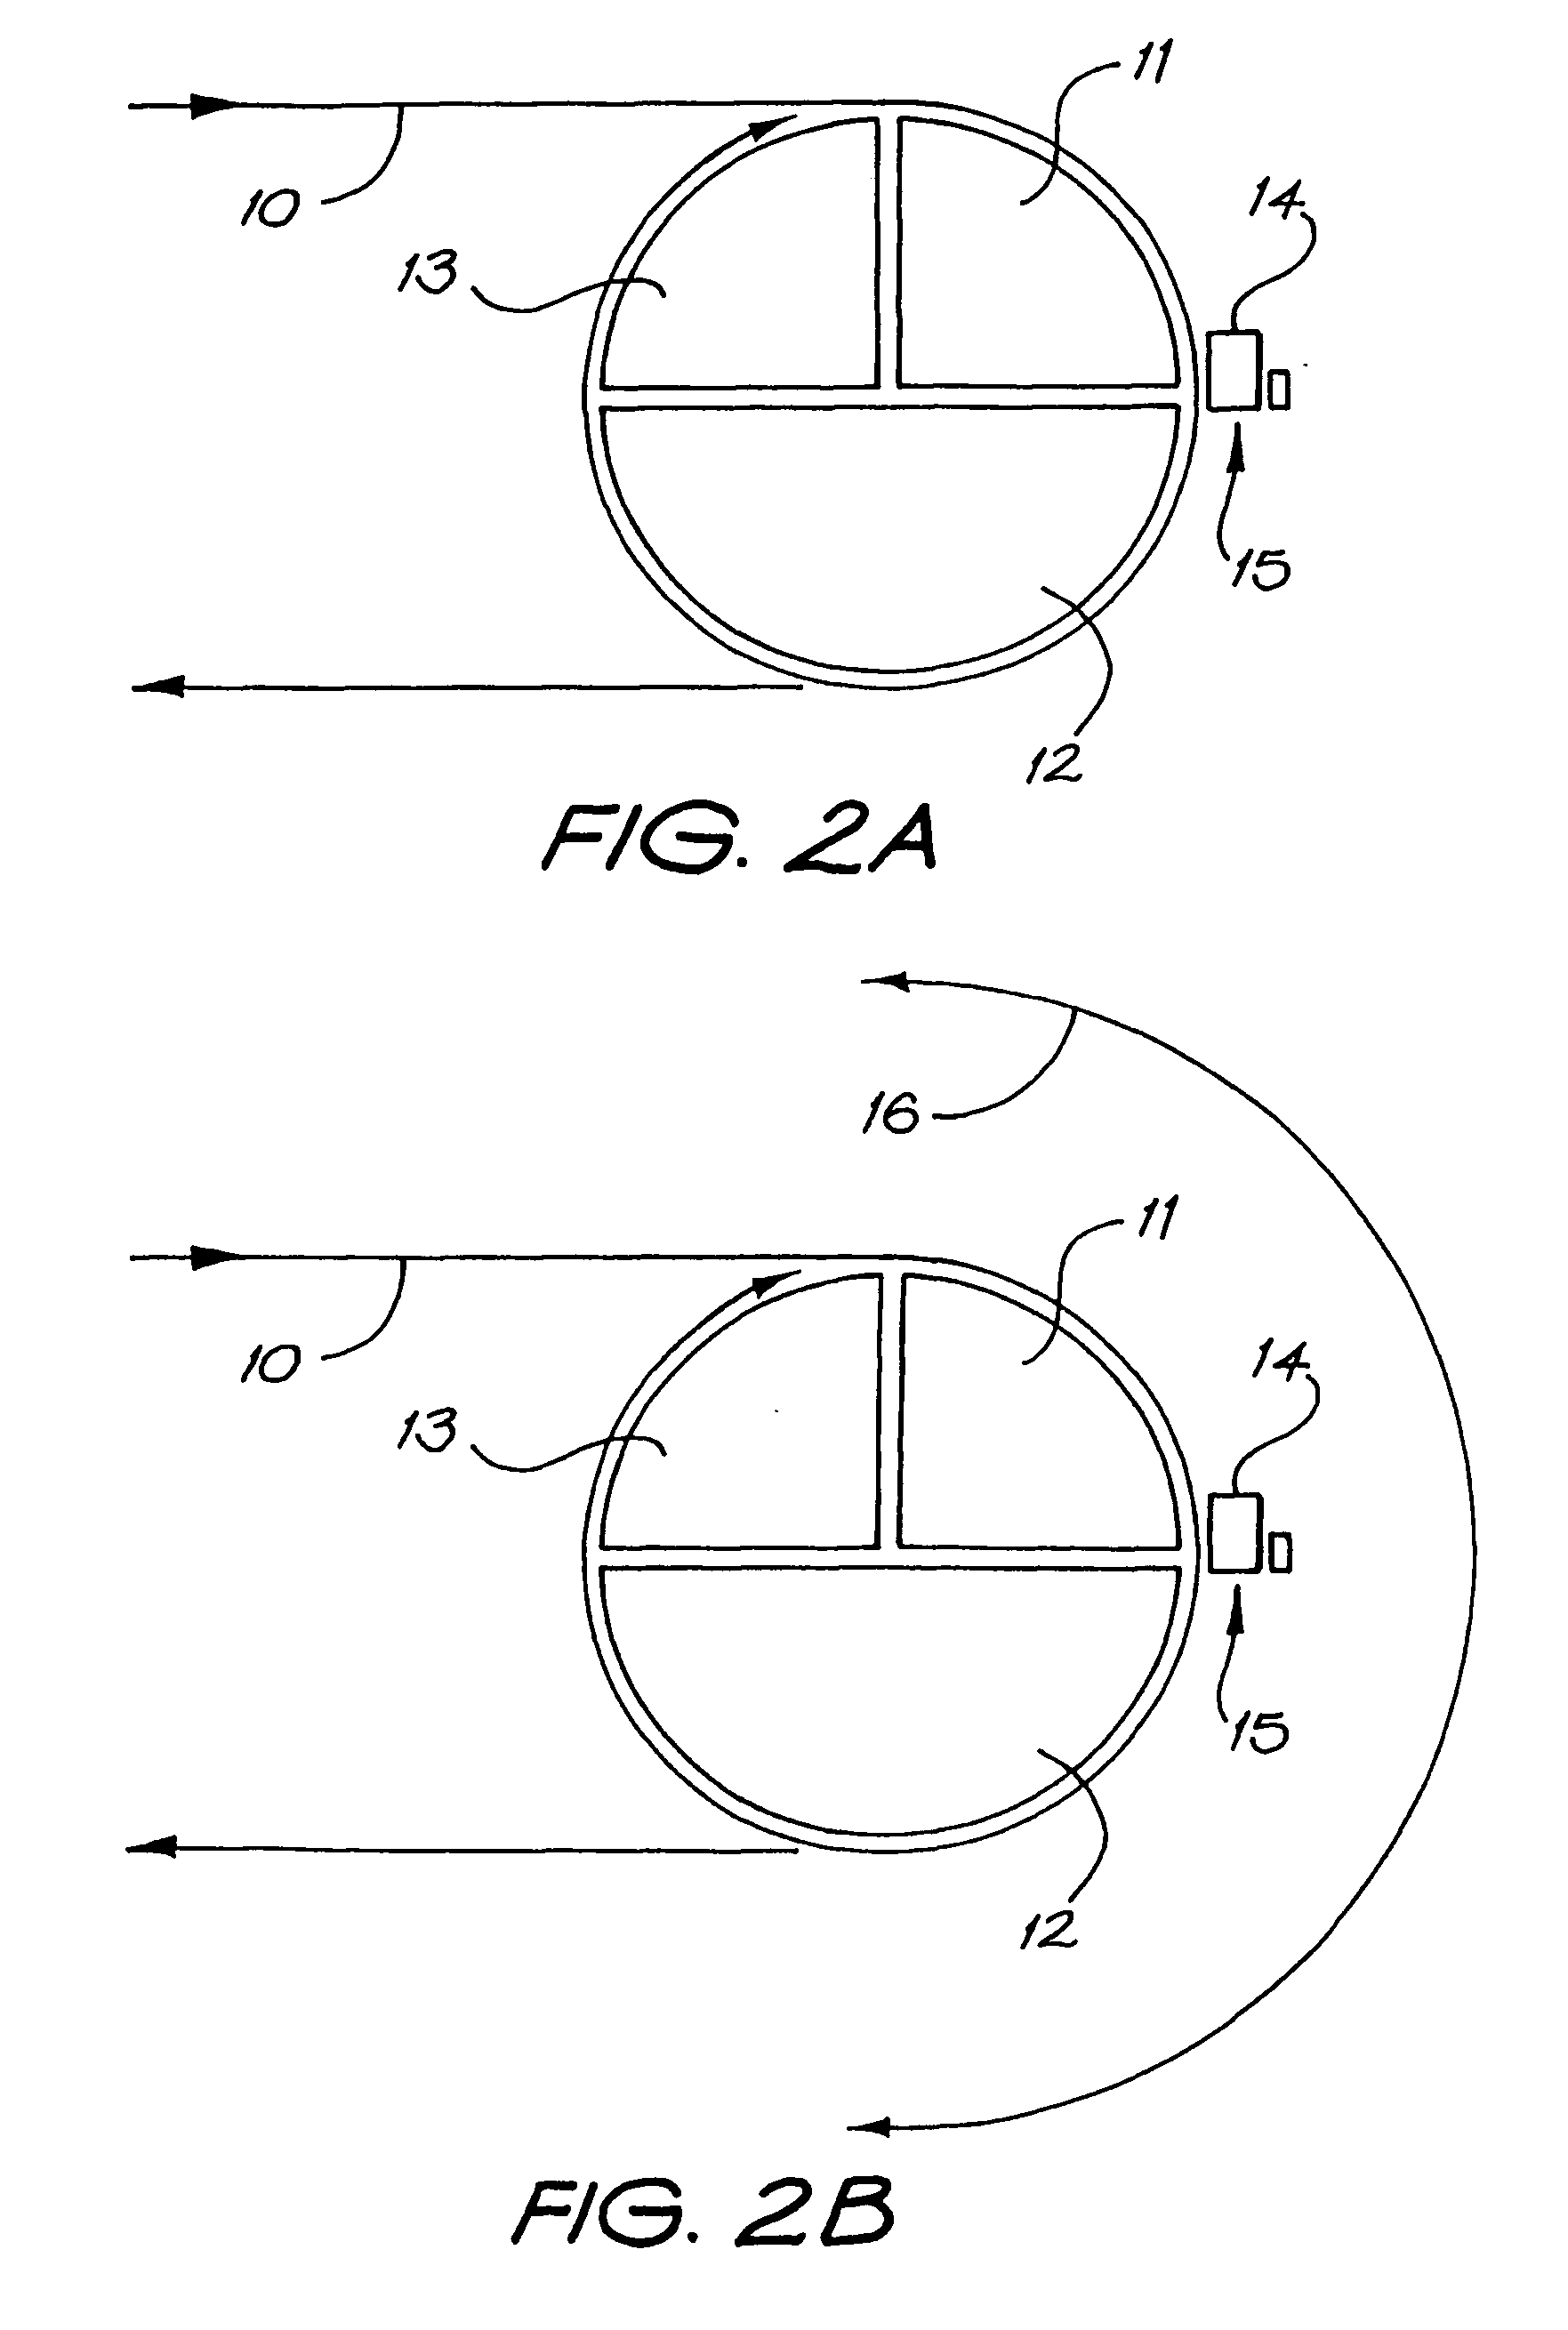 Continous flow thermal device